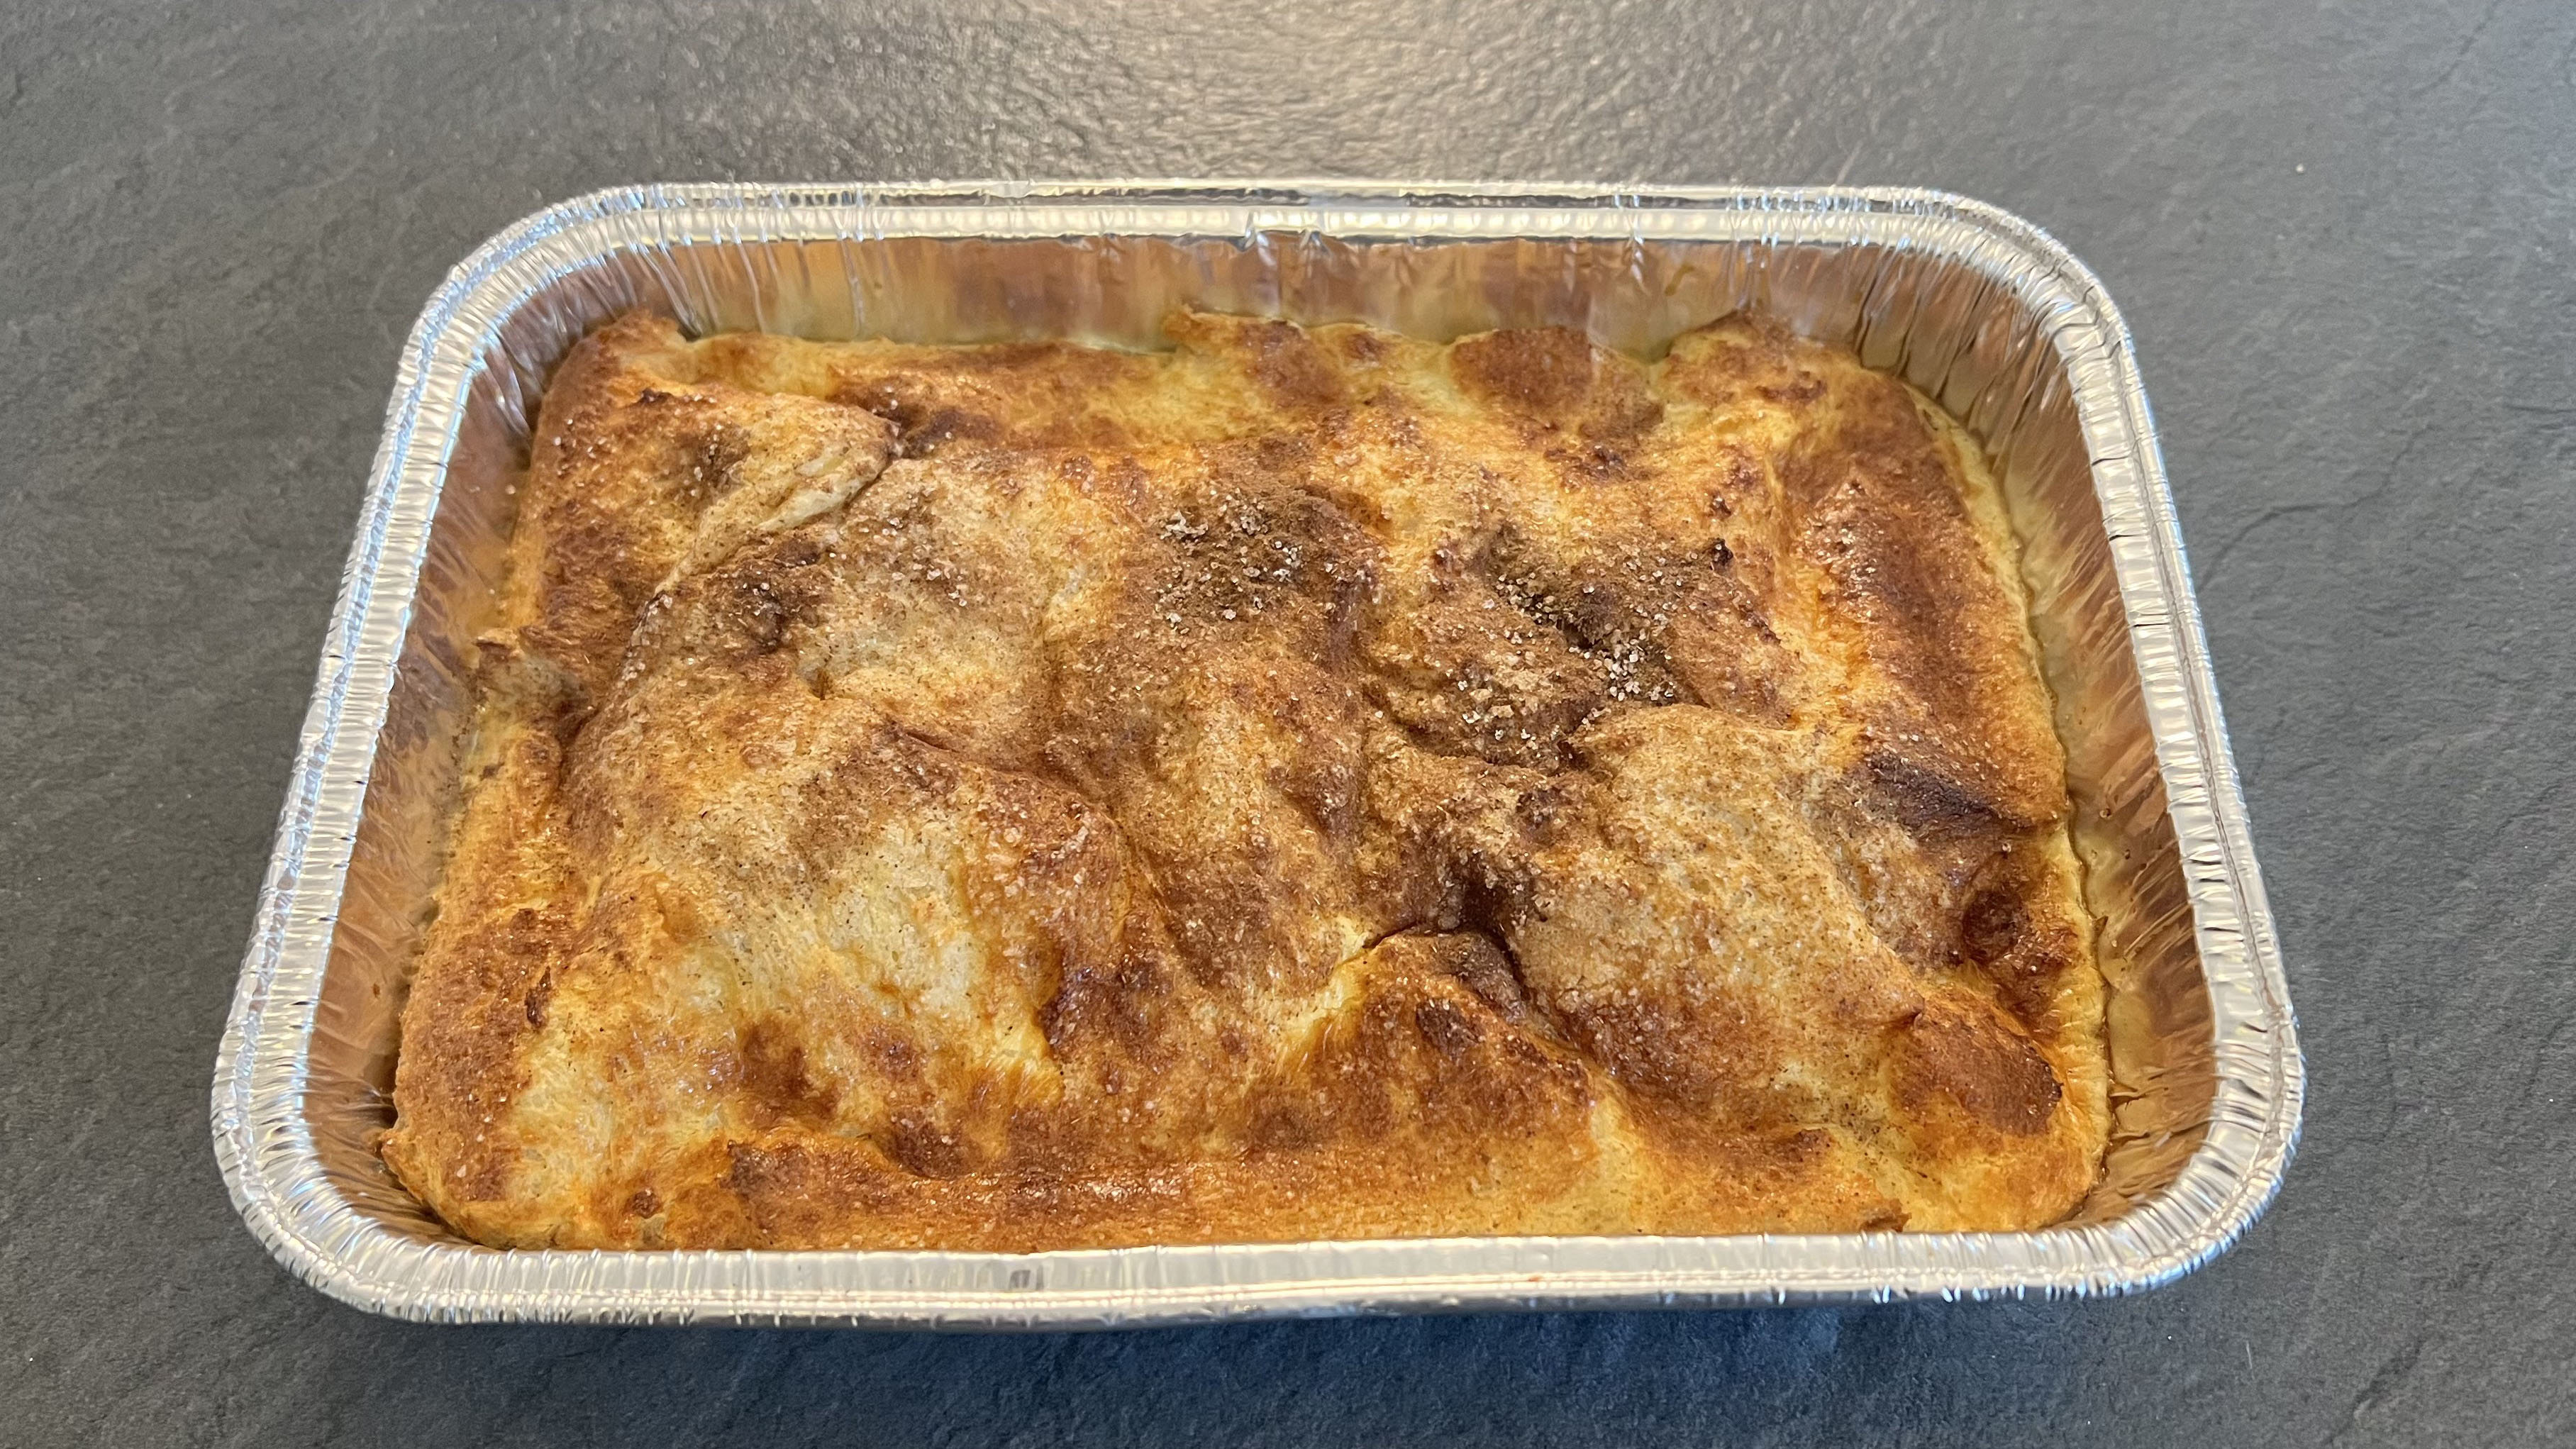 Cooked bread and butter pudding in a metal tray